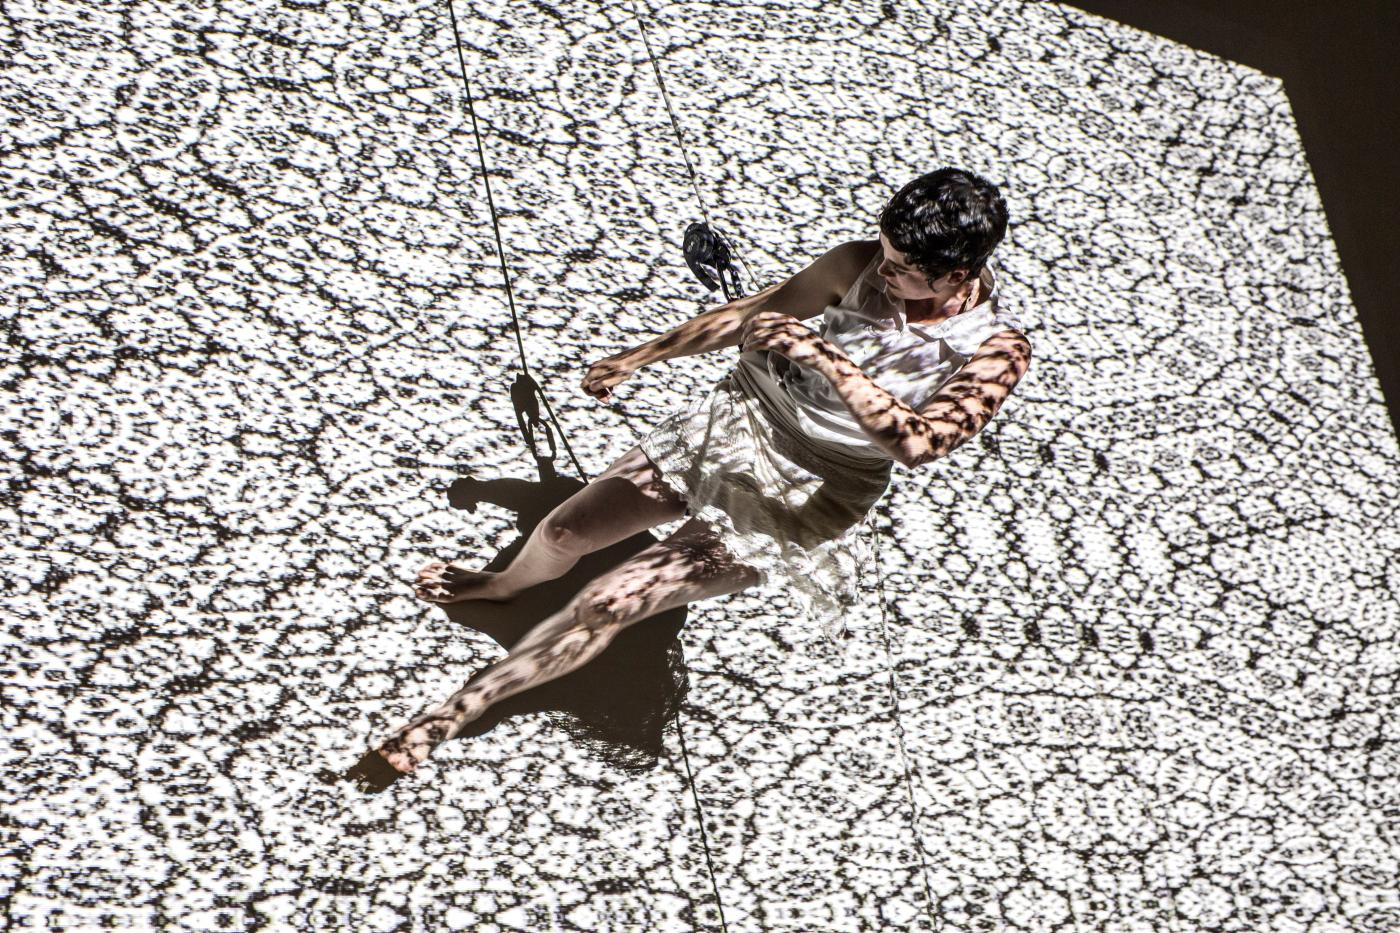 Dangling along a wall with projected patterns over her, a woman dances sideways, on the wall.